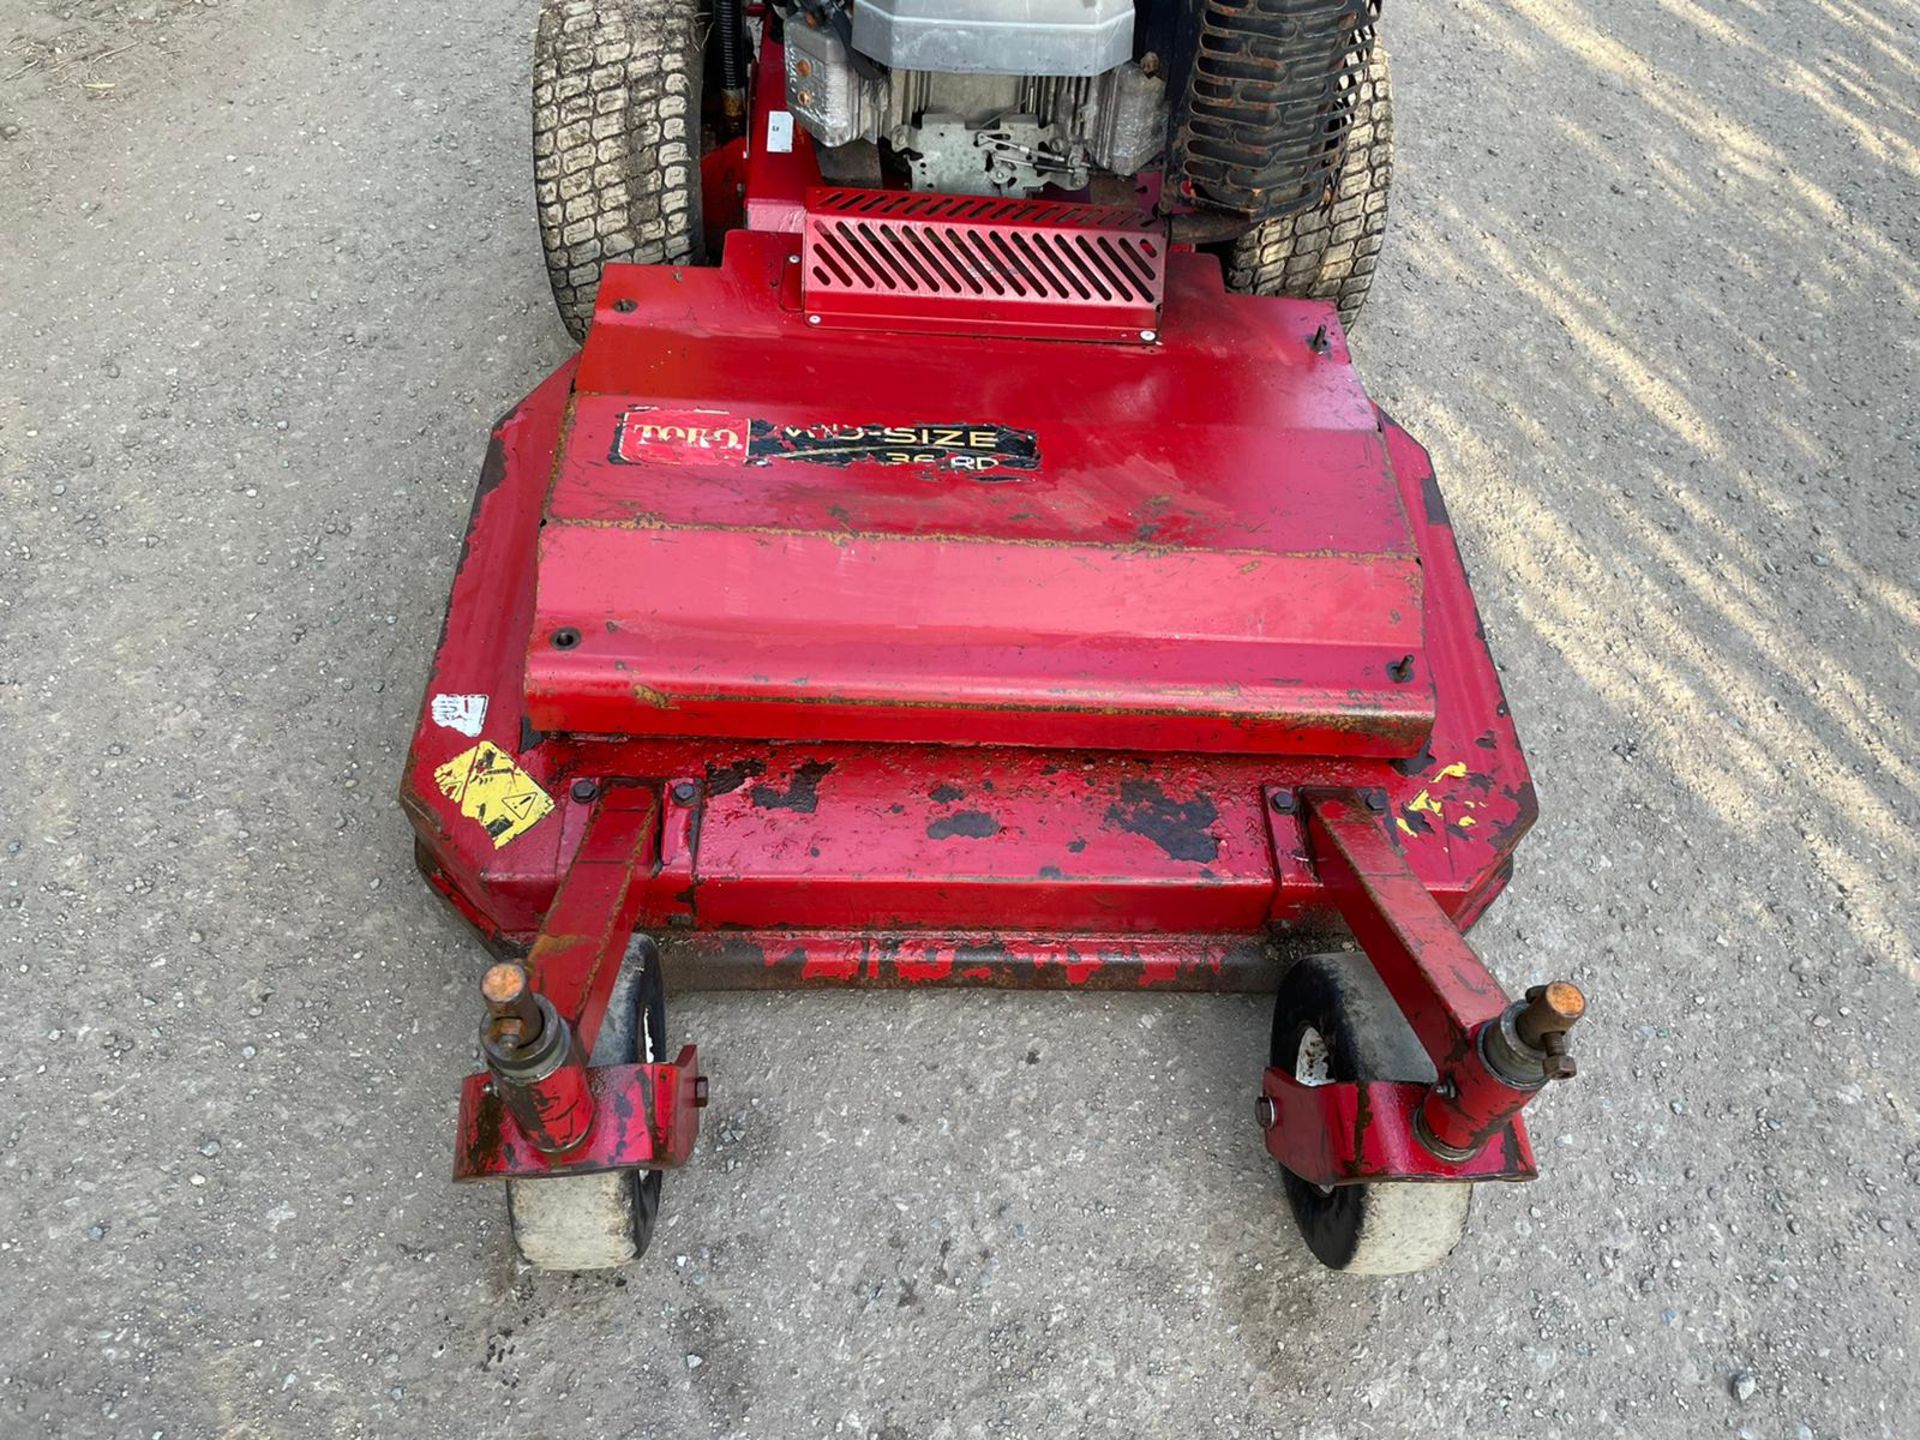 TORO MIS-SIZE 36RD PEDESTRIAN MOWER, RUNS DRIVES AND CUTS, SELF PROPELLED *NO VAT* - Image 6 of 6